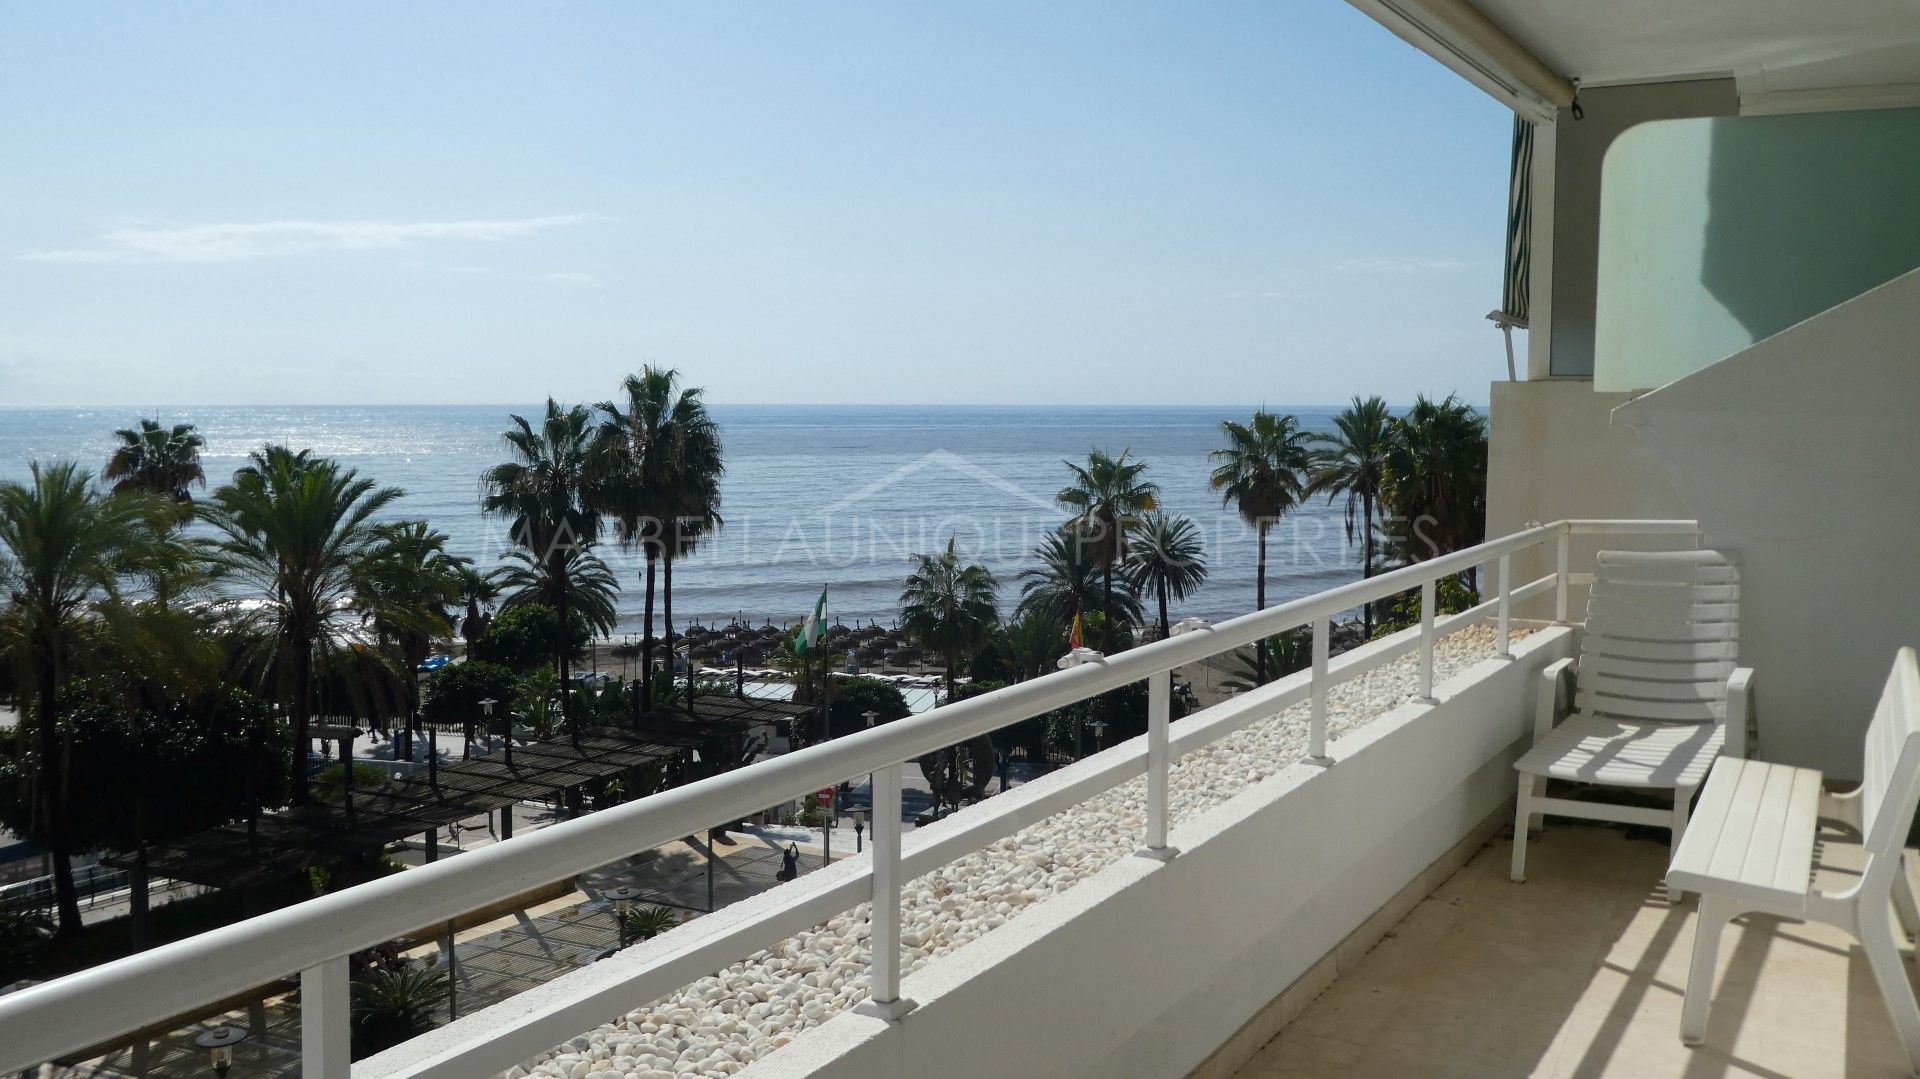 3 bedroom apartment in the heart of Marbella town with amazing sea views